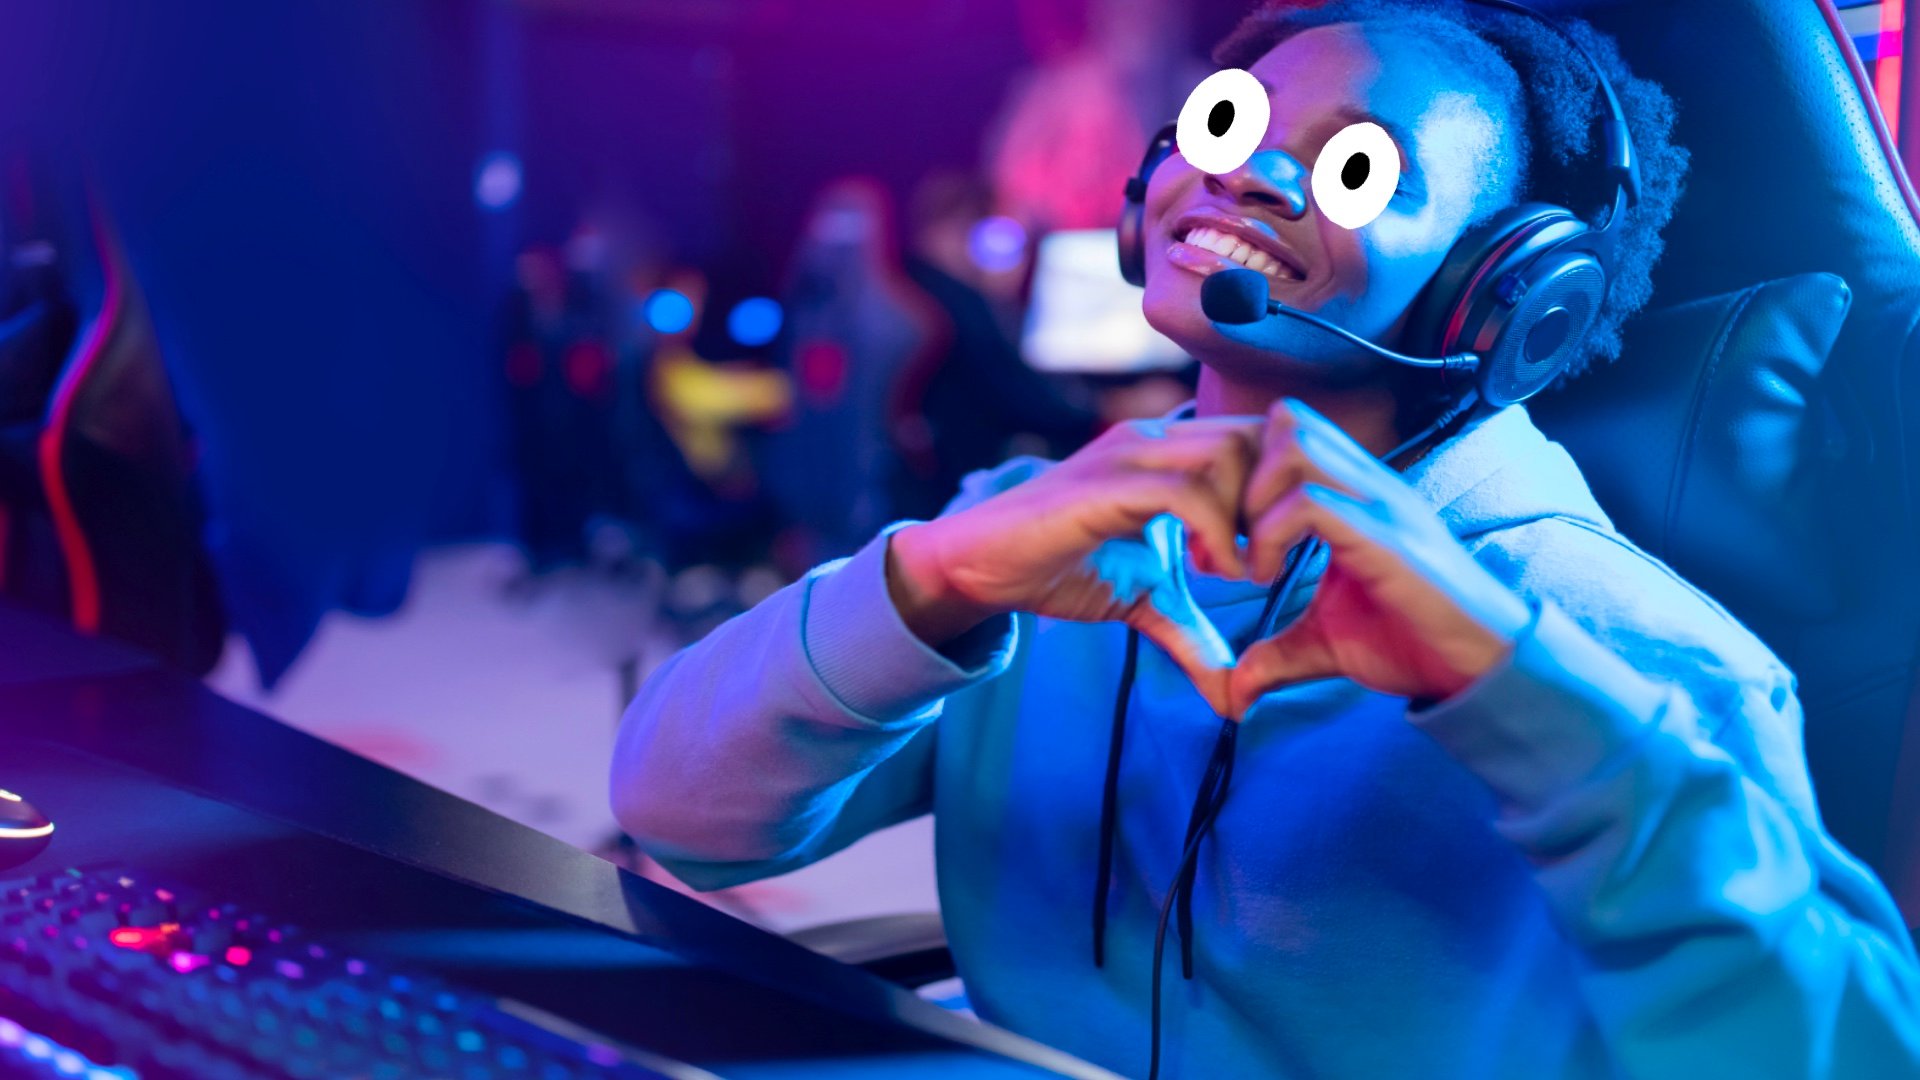 A gamer making a heart shape with their hands